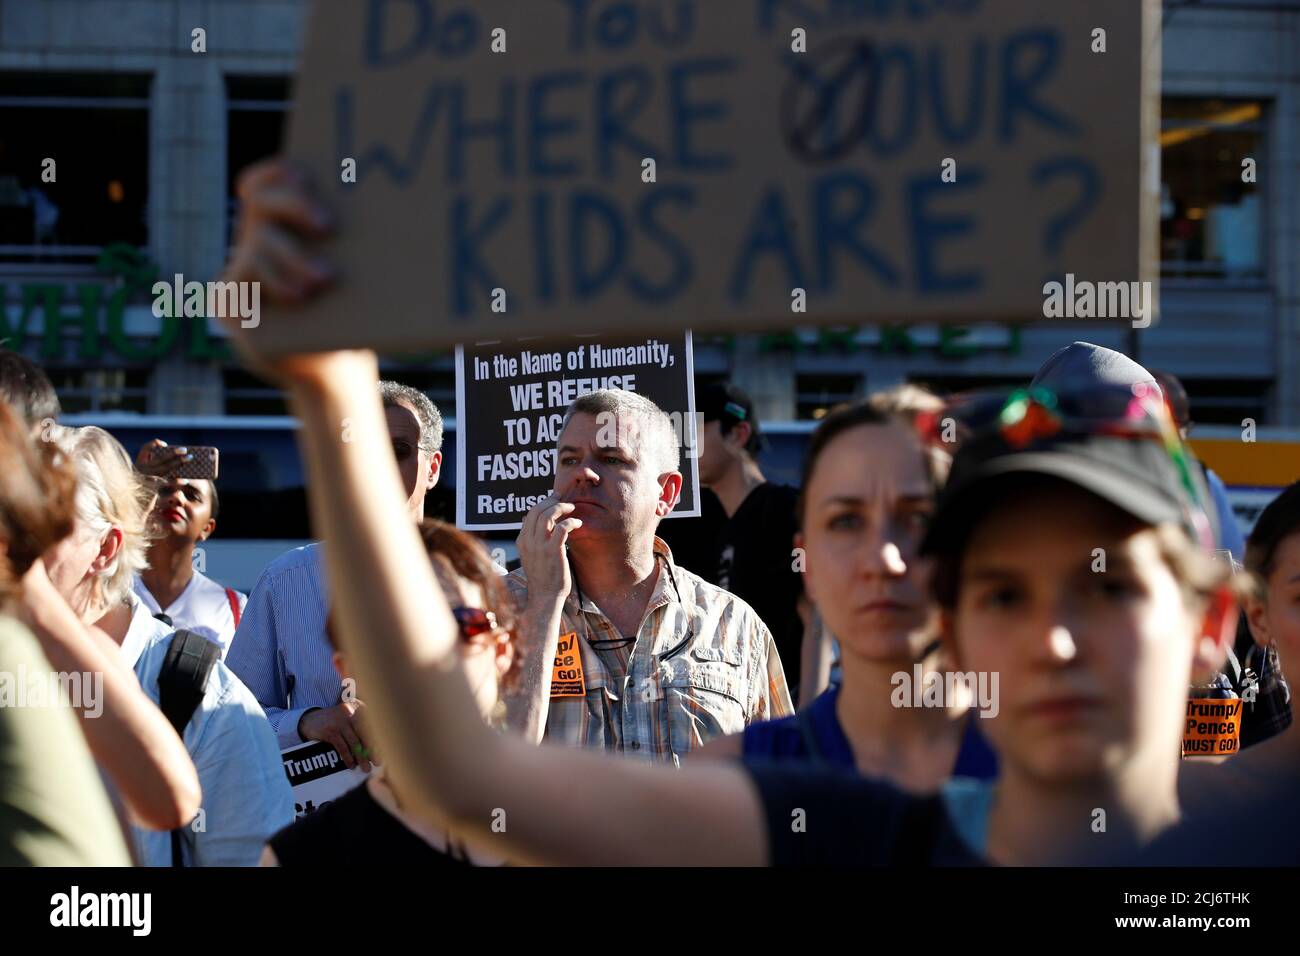 People protest against the Trump administration policy of separating immigrant families suspected of illegal entry, in New York, NY, U.S., June 19, 2018.  REUTERS/Brendan McDermid Stock Photo